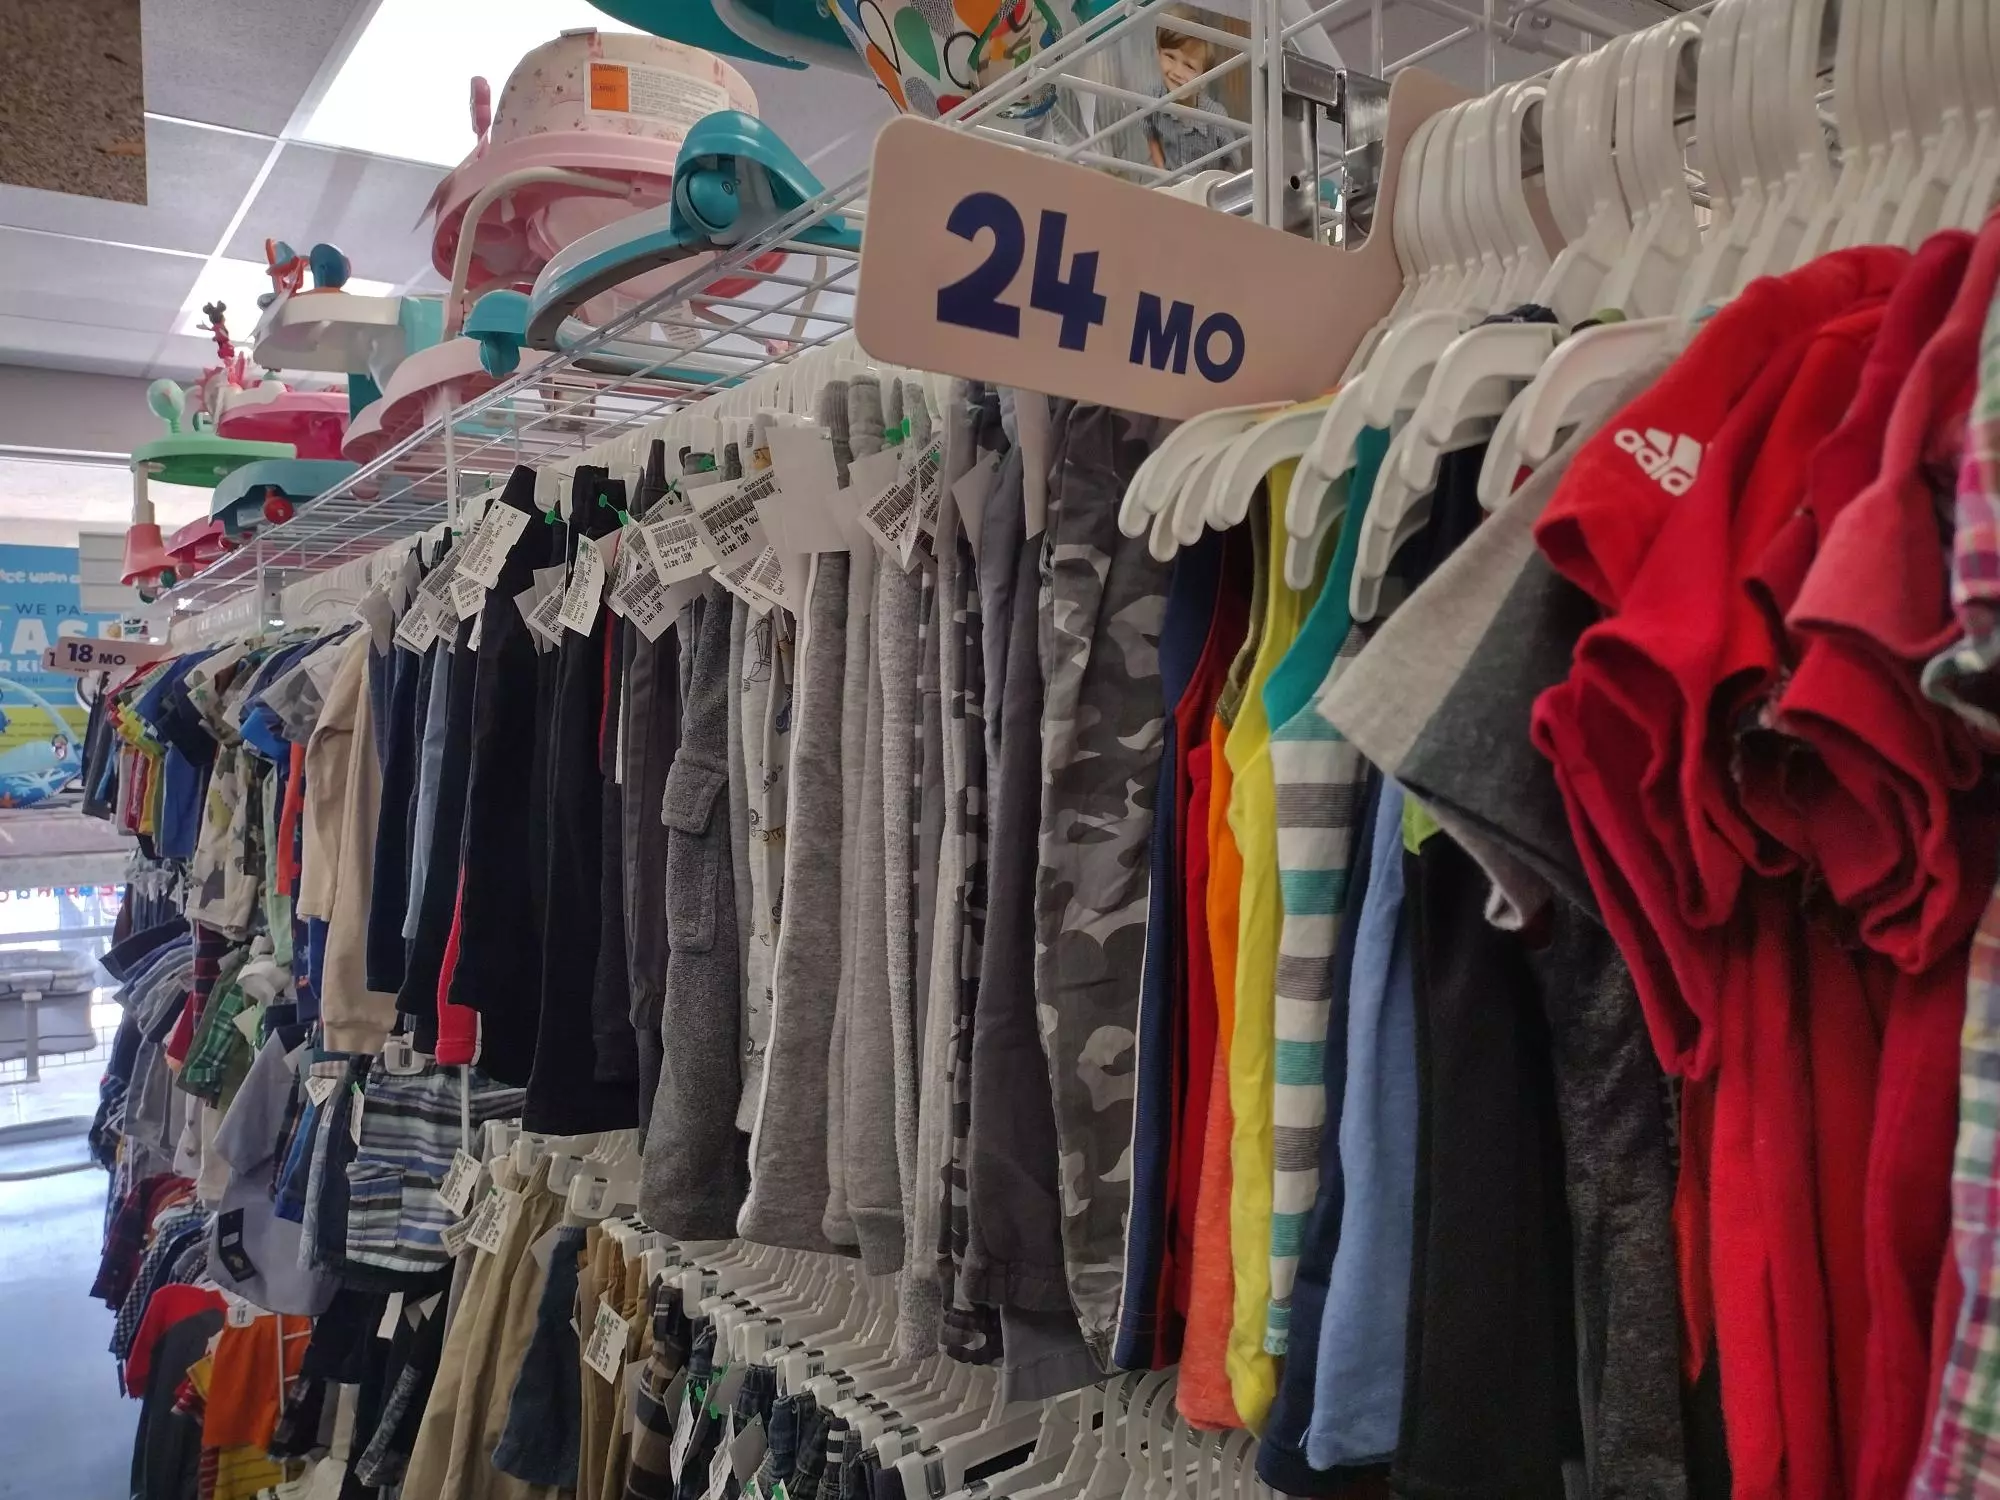 Much-needed' gently used kids' clothing store opens downtown